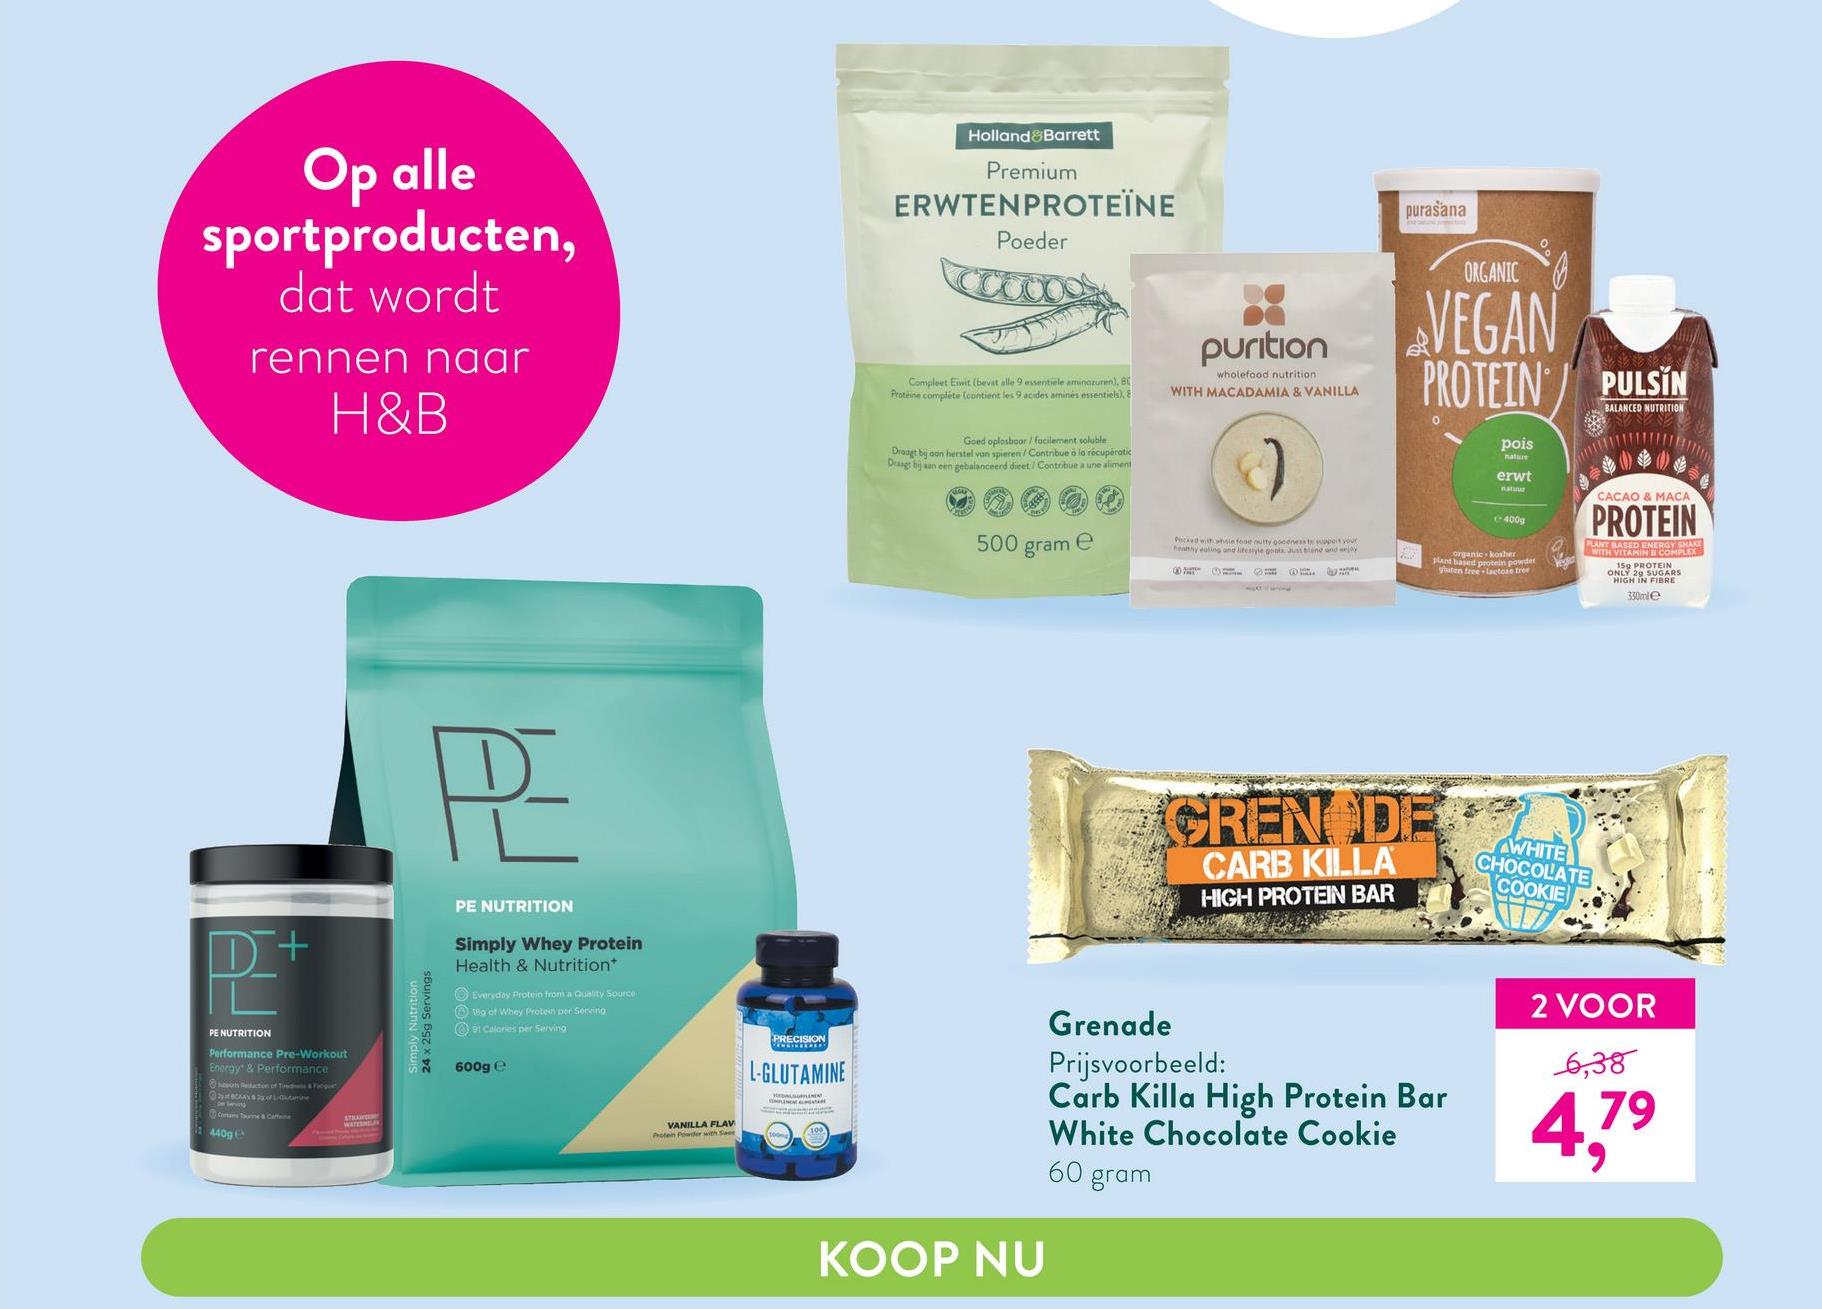 Op alle
sportproducten,
dat wordt
rennen naar
H&B
P+
PE NUTRITION
Performance Pre-Workout
Energy & Performance
action of Ted&Fogue
RAY $2pofane
Consune & Coffe
440g
STRANG
WATES
PE
PE NUTRITION
Simply Whey Protein
Health & Nutrition
Everyday Protein from a Quality Source
180 of Whey Protein per Serving
91 Calories per Serving
24 x 25g Servings
600g e
VANILLA FLAV
Protein Powder with Sa
Poste
L-GLUTAMINE
PLINE te
Sangat pent
Holland Barrett
Premium
ERWTENPROTEÏNE
Poeder
Compleet Eiwit (bevat alle 9 essentiele aminozuren), 80
Proteine complete (contient les 9 acides aminés essentiels), E
Goed oplosboor/ facilement soluble
Draagt bij aan herstel van spieren/Contribue à la récupératic
Draagt bij aan een gebalanceerd dieet / Contribue a une aliment
500
e
gram
KOOP NU
purasana
0
ORGANIC
VEGAN
PROTEIN PULSIN
BALANCED NUTRITION
pois
nature
erwt
natur
CACAO & MACA
400g
PROTEIN
PLANT BASED ENERGY SMAKE
organic kosher
plant based protein powder
WITH VITAMIN B COMPLEX
5 PROTEIN
ghaten free to free
GLARS
HIGH IN FIBRE
330mle
purition
wholefood nutrition
WITH MACADAMIA & VANILLA
Picked with white food nutty gooeness to support your
healthy eating and lifestyle ponts Just stone and enjoy
HT DH
CREN DE
CARB KILLA
HIGH PROTEIN BAR
Grenade
Prijsvoorbeeld:
Carb Killa High Protein Bar
White Chocolate Cookie
60 gram
WHITE
CHOCOLATE
COOKIE
2 VOOR
6,38
4,7⁹